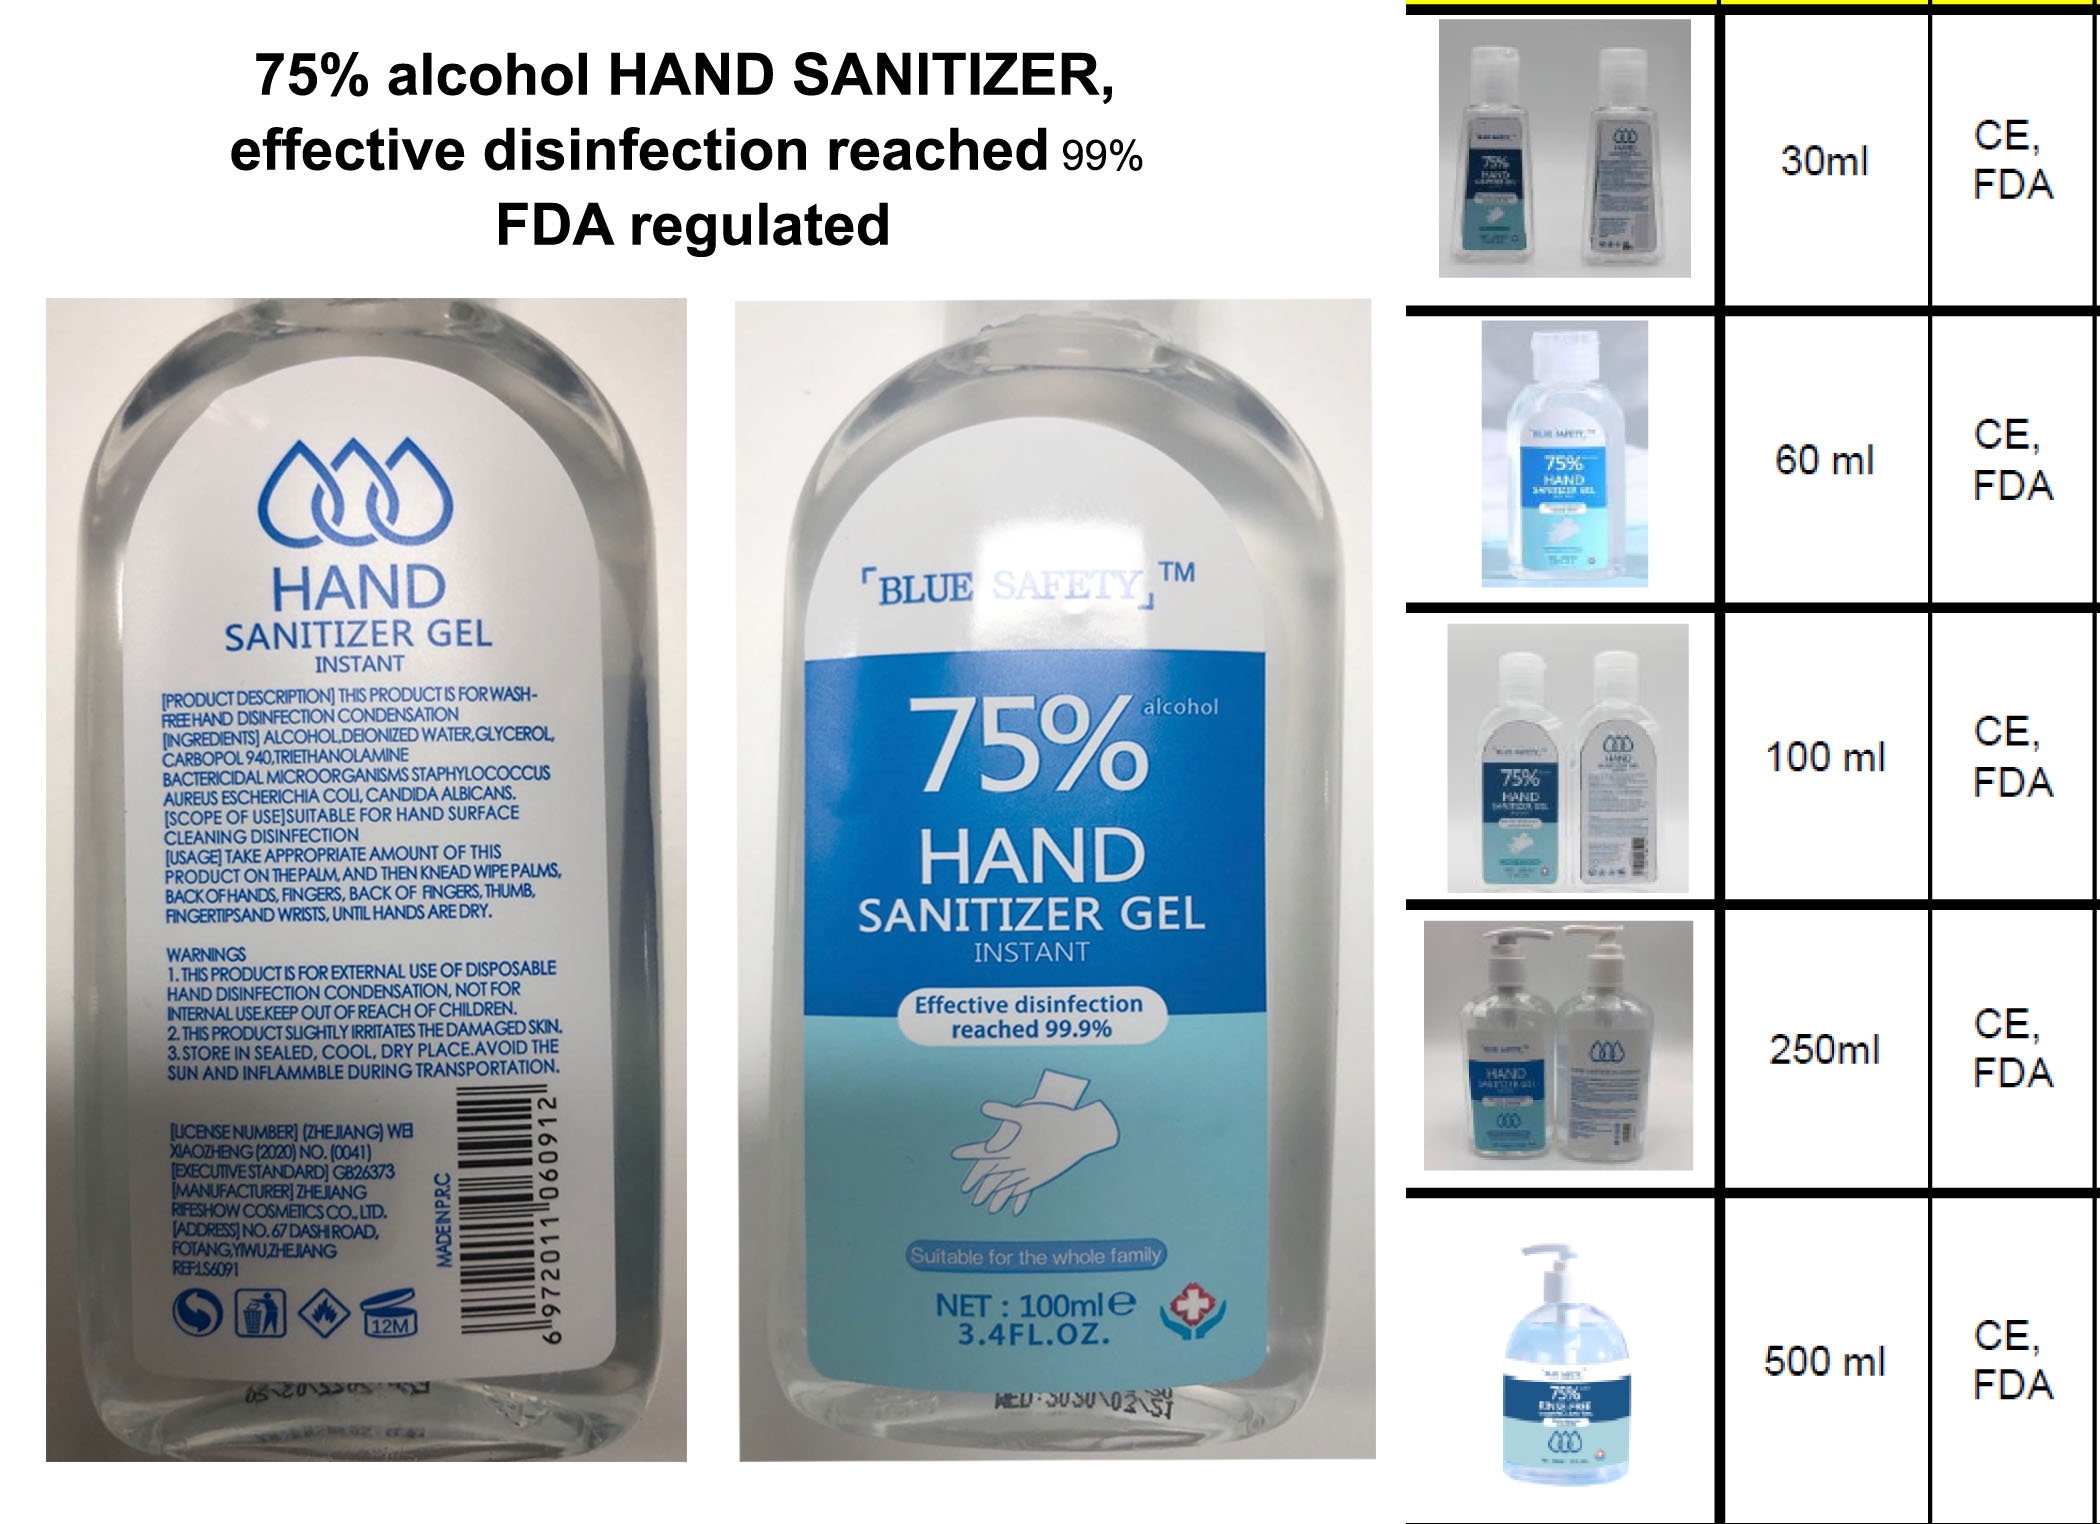 75% alcohol HAND SANITIZER, effective disinfection reached 99% FDA regulated